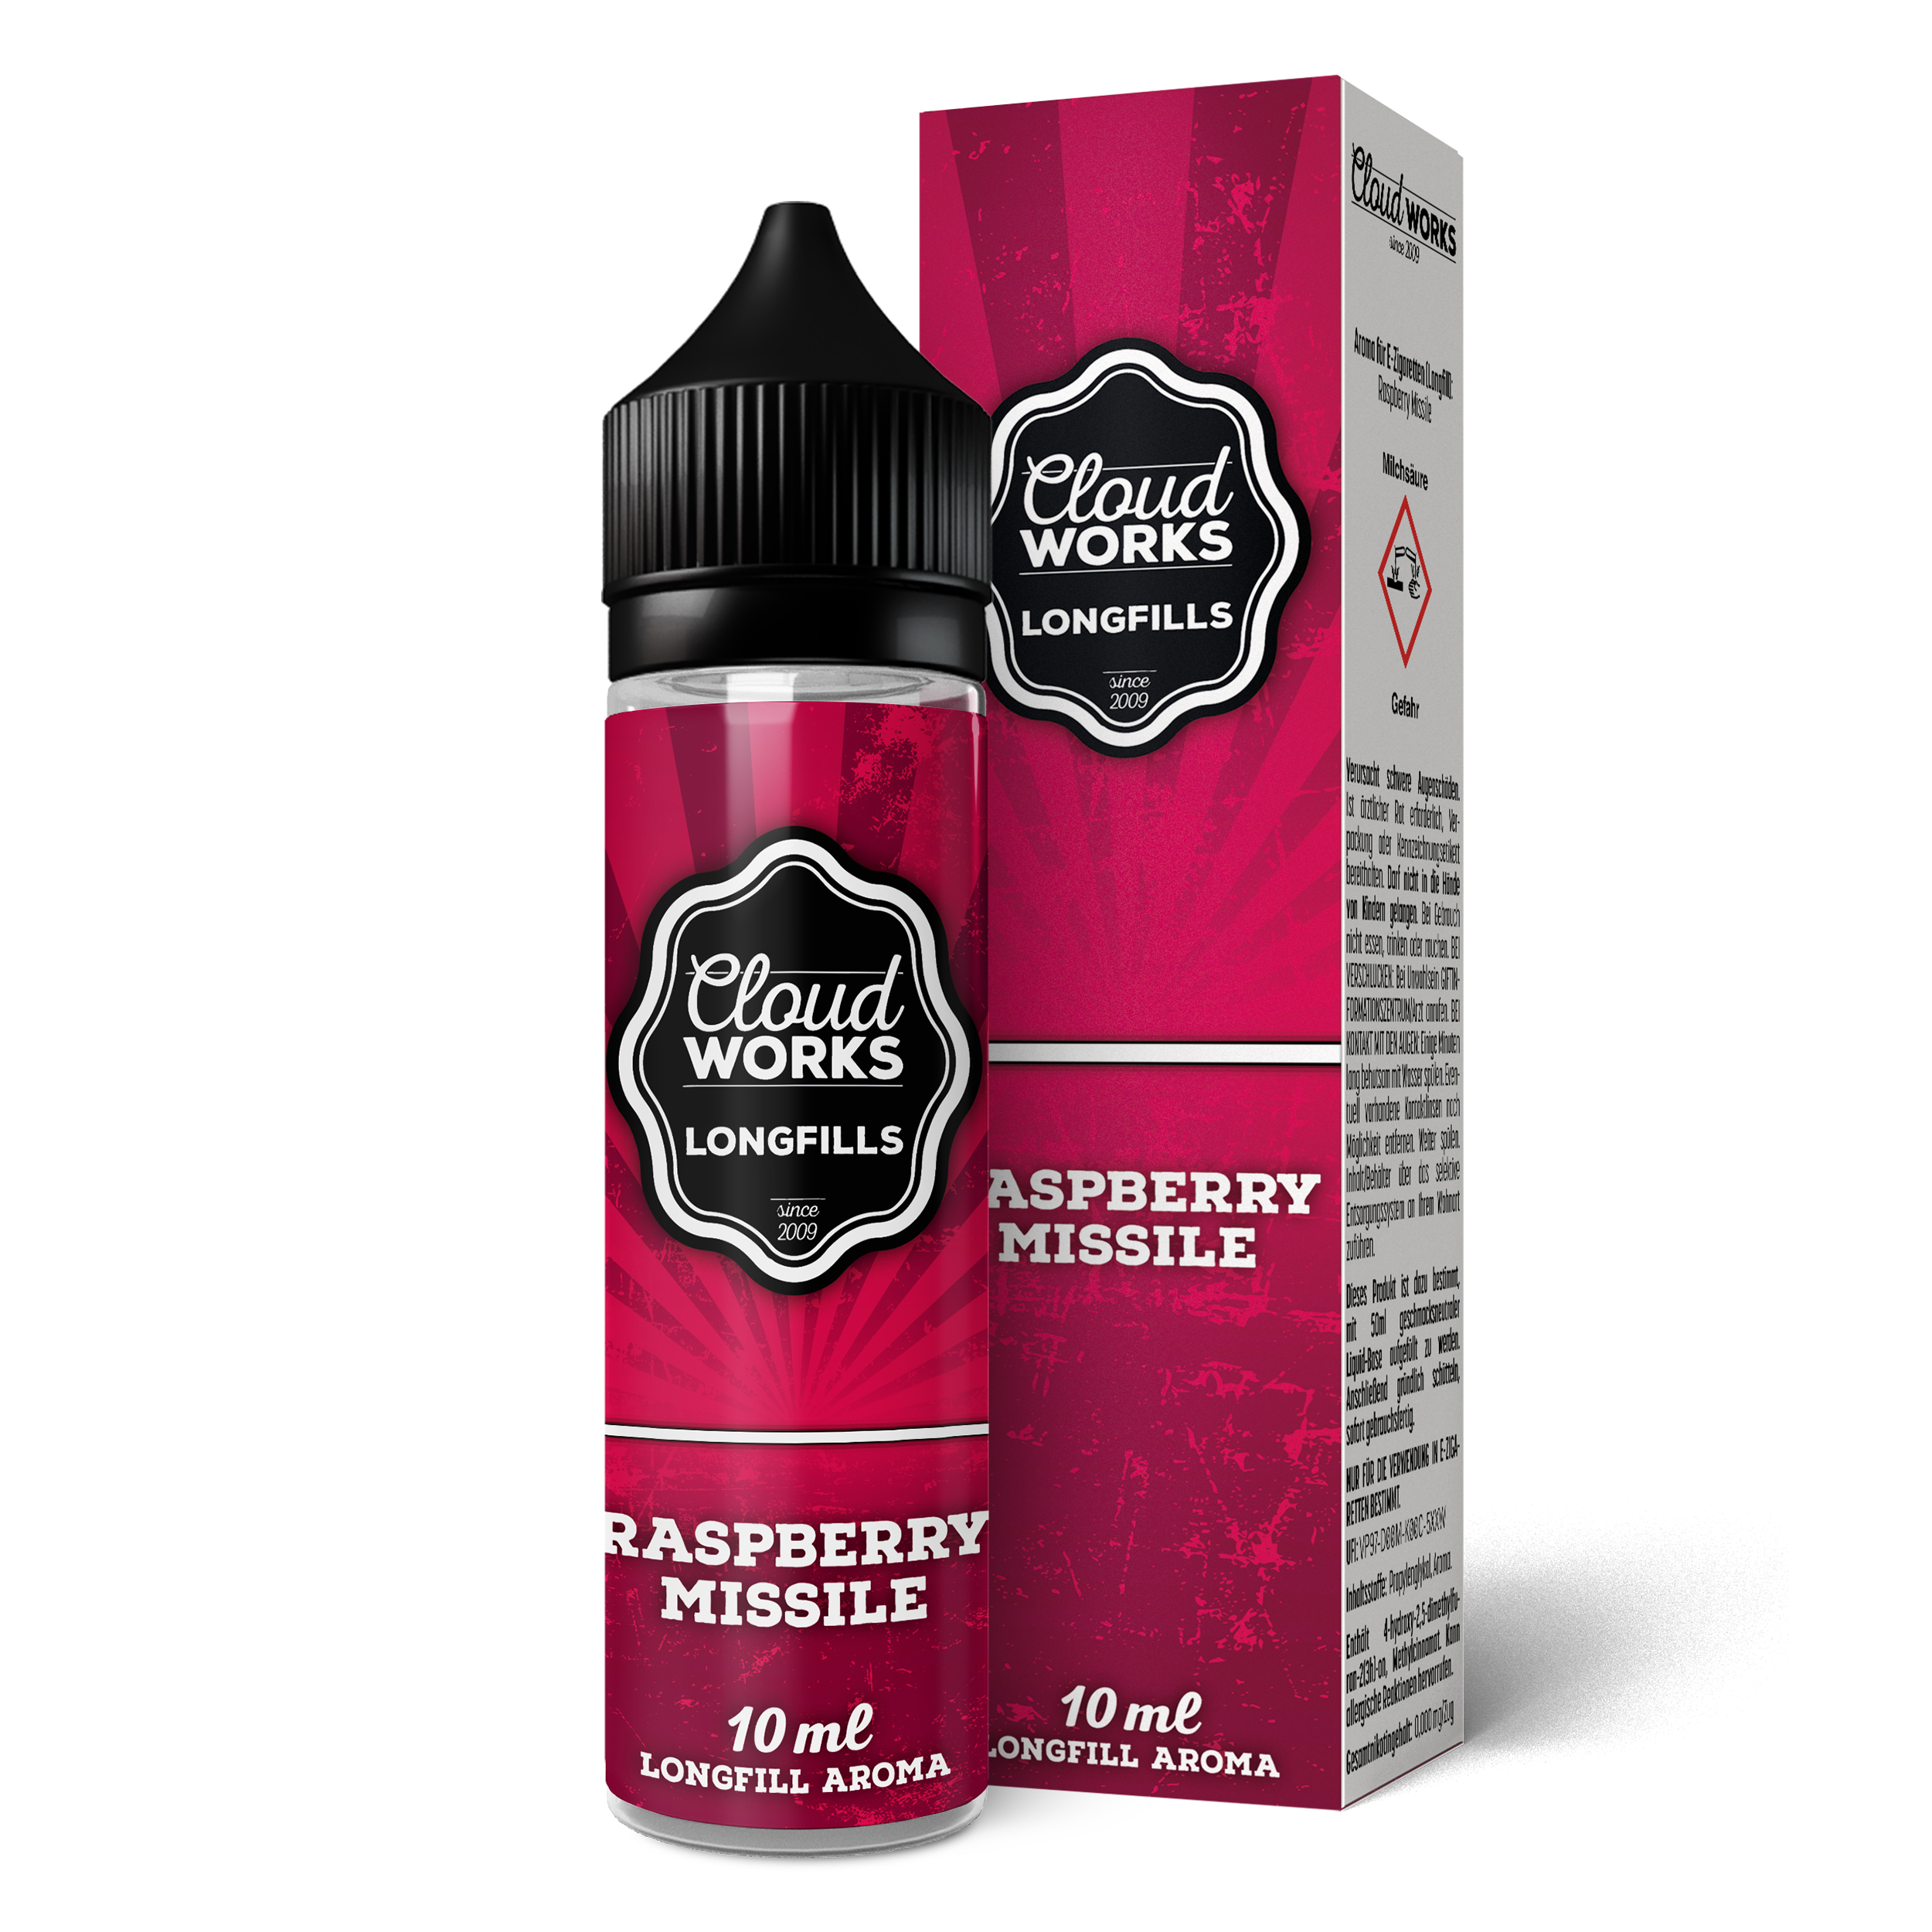 Cloudworks Overdosed | Raspberry Missile | Longfill Aroma 10ml in 60ml Flasche